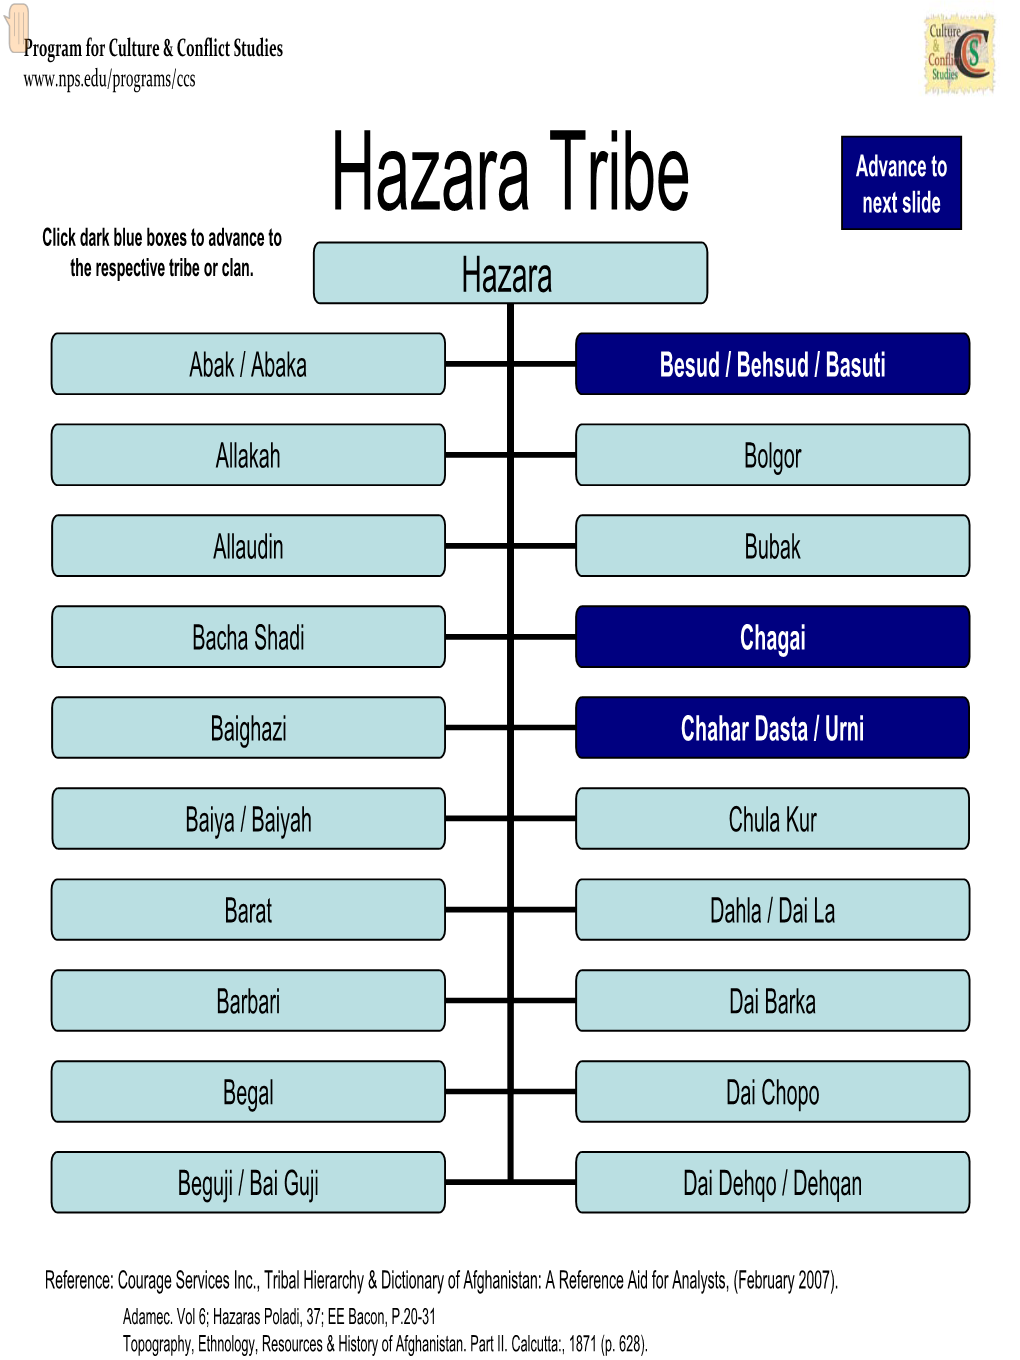 Hazara Tribe Next Slide Click Dark Blue Boxes to Advance to the Respective Tribe Or Clan